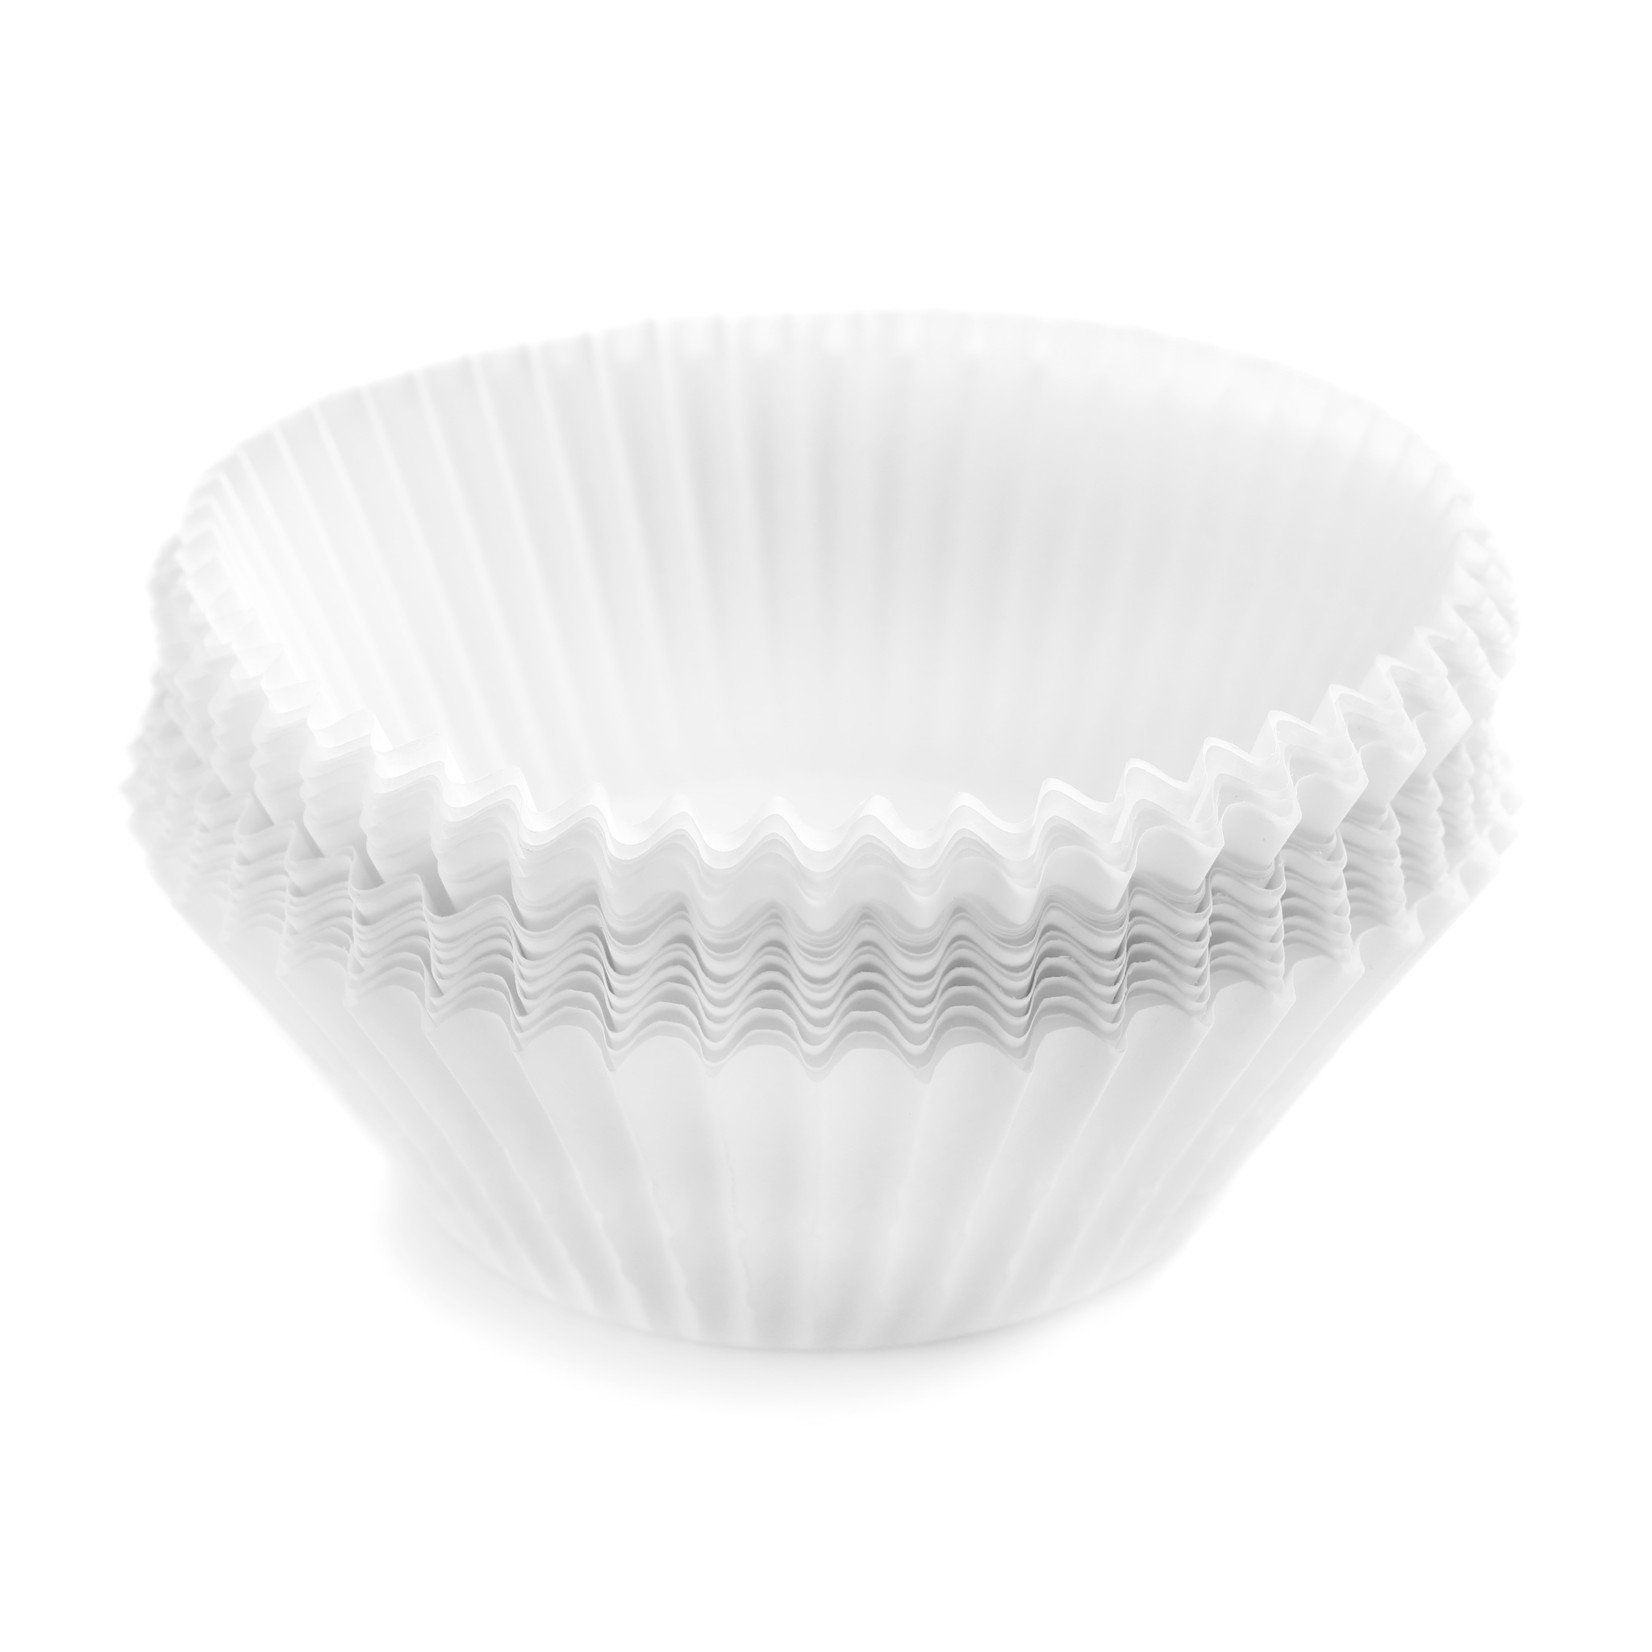 Pastry Depot White Cupcake Liner - 2 x 1.25" (500 ct)